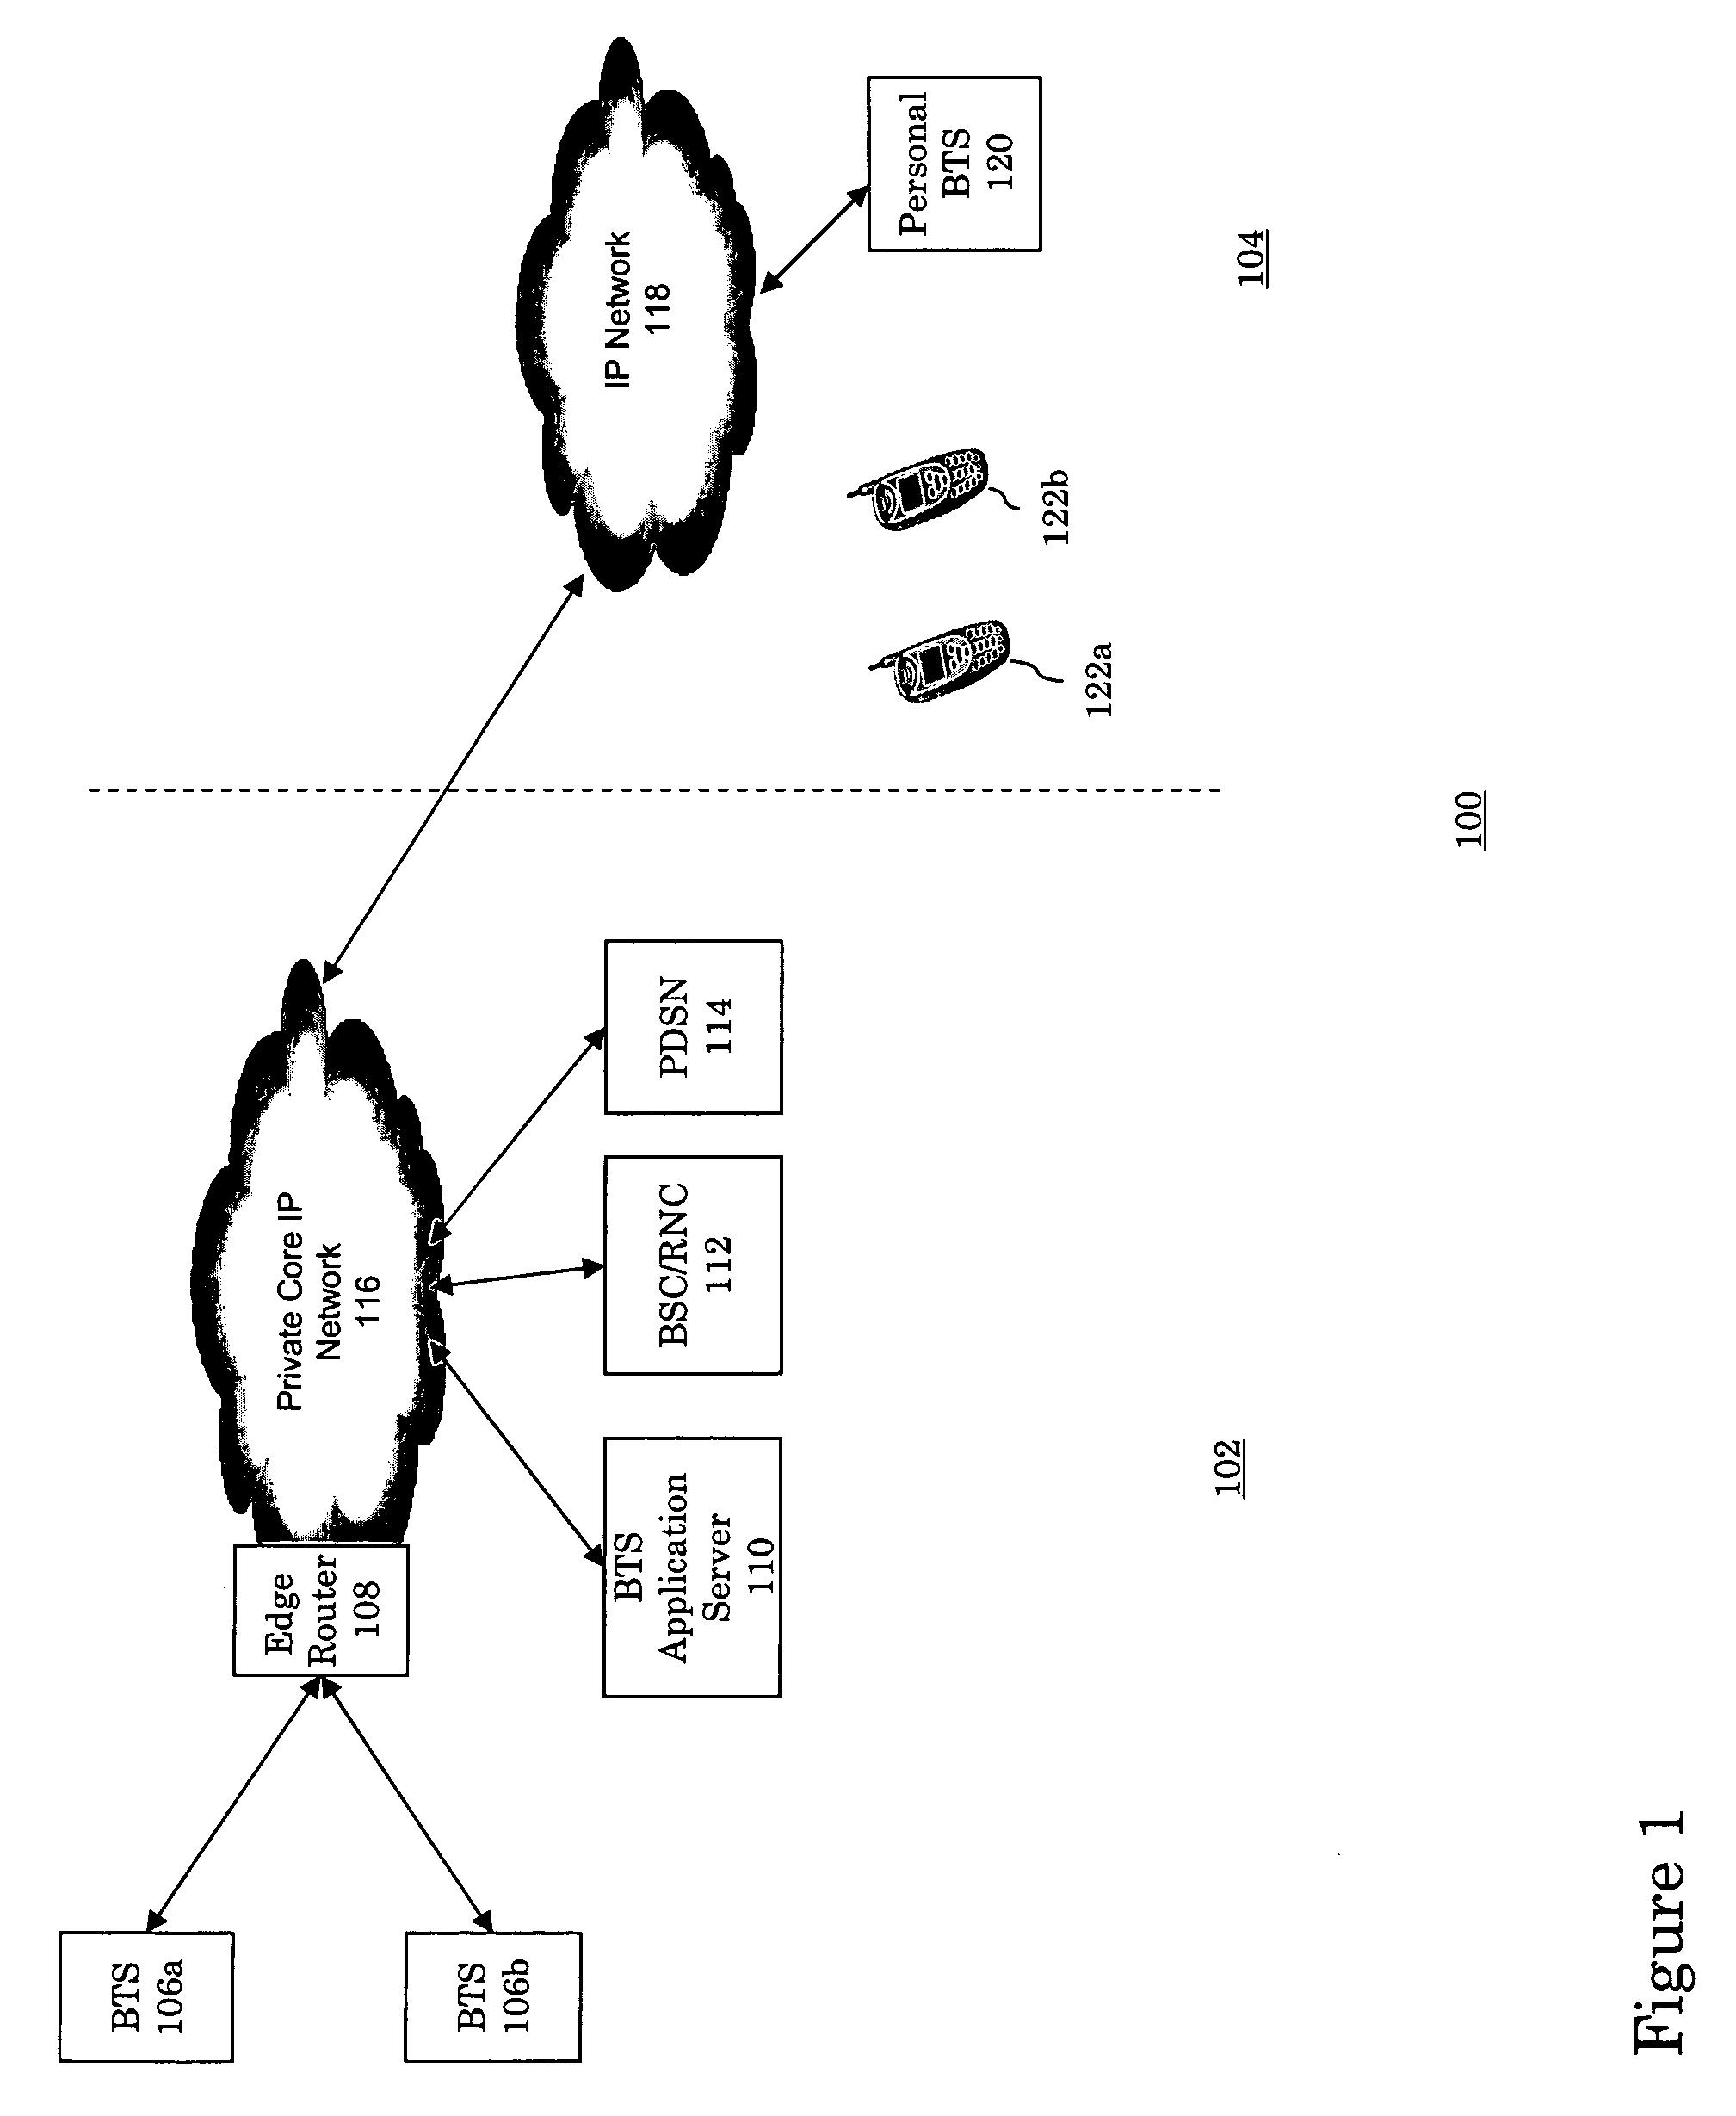 System and method for determining a base transceiver station location